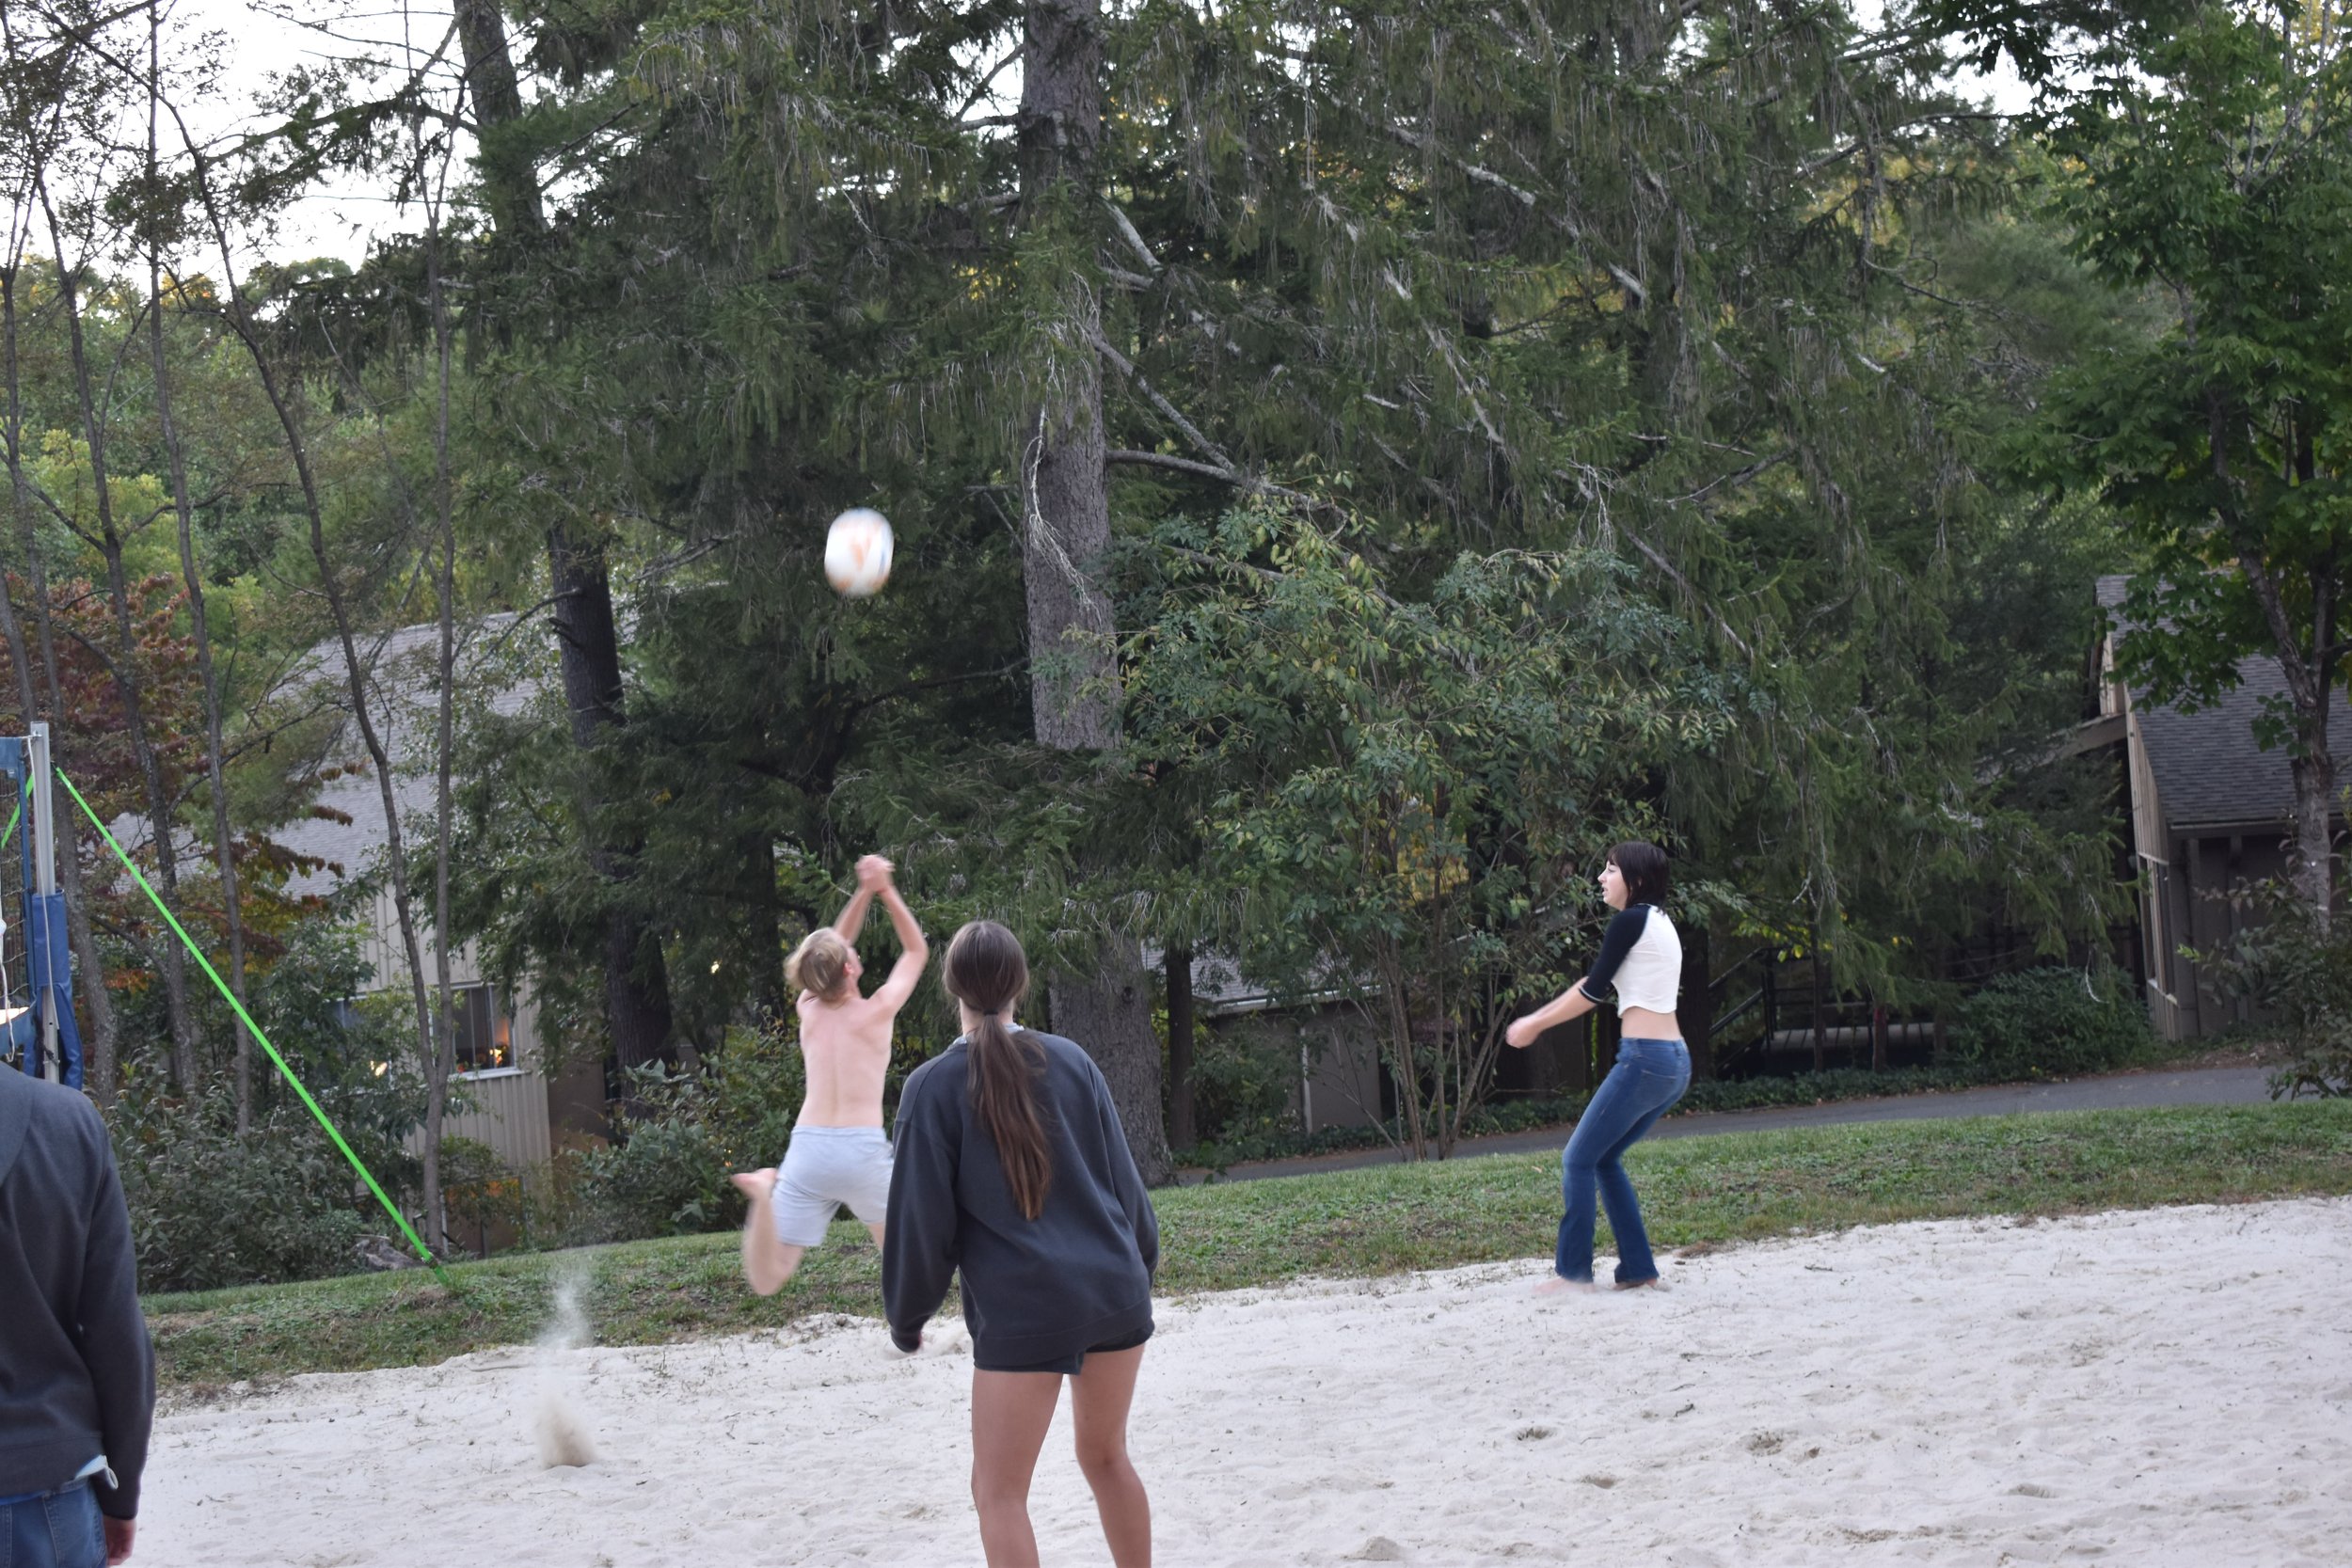  Mac saving the ball from going out during a chilly beach volleyball pickup game. 